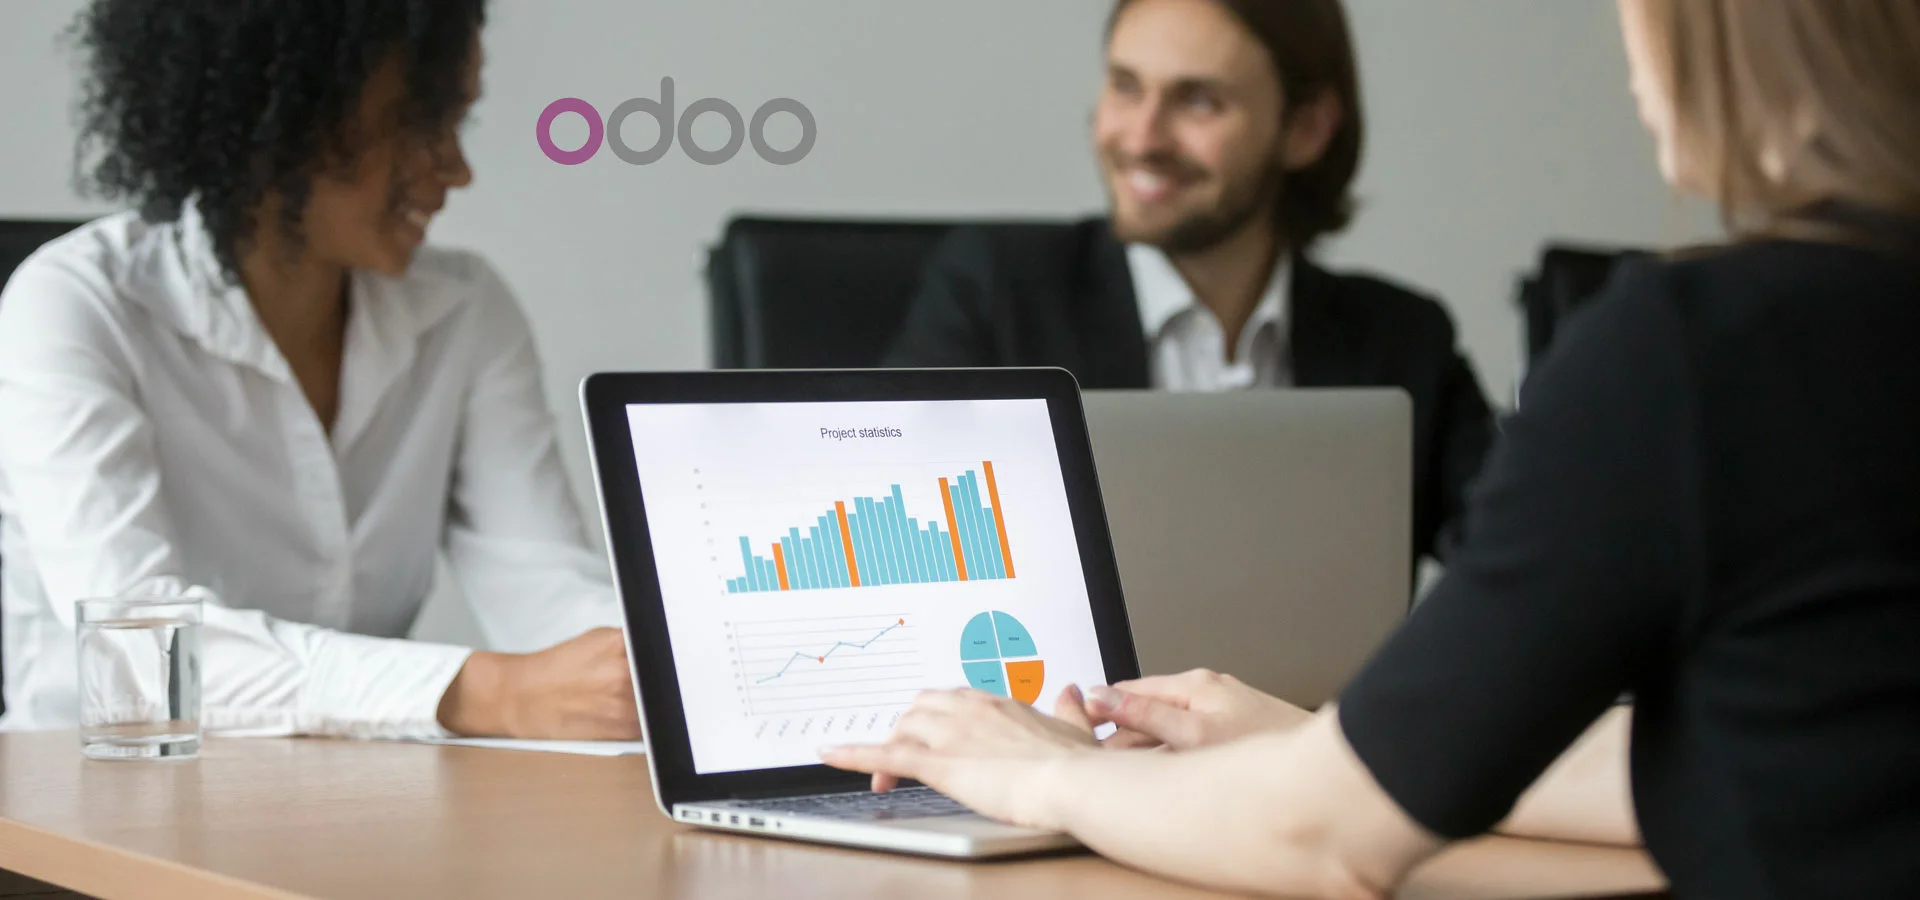 odoo-erp-support-and-services-related-blog-137